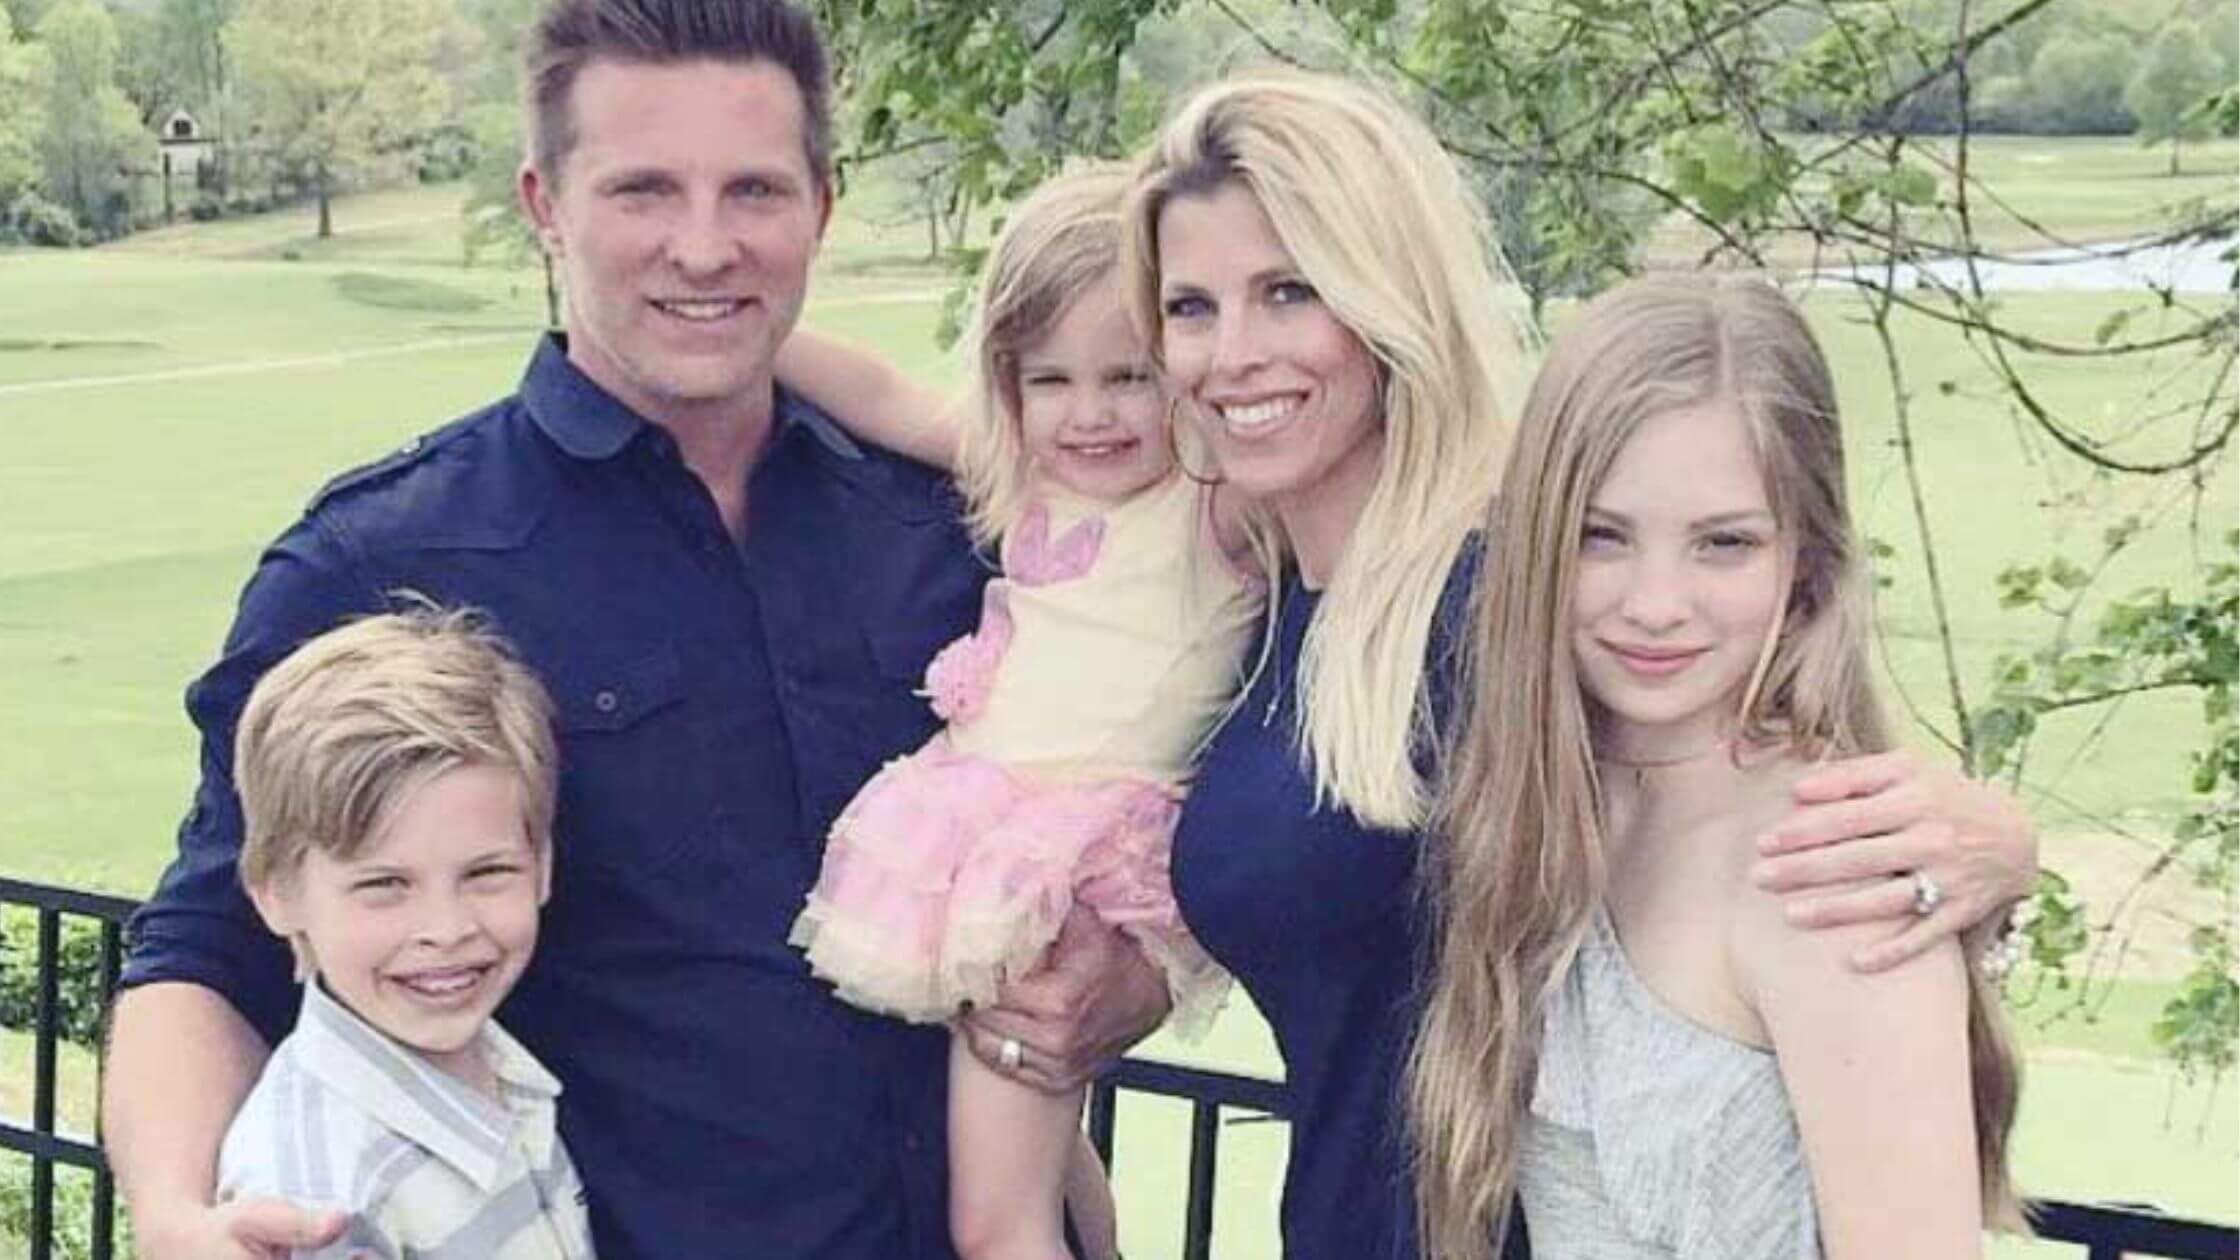 Steve Burton Asks For Joint Custody Of His Children, But Divorce Papers Show That The Couple Did Not Have A Prenup